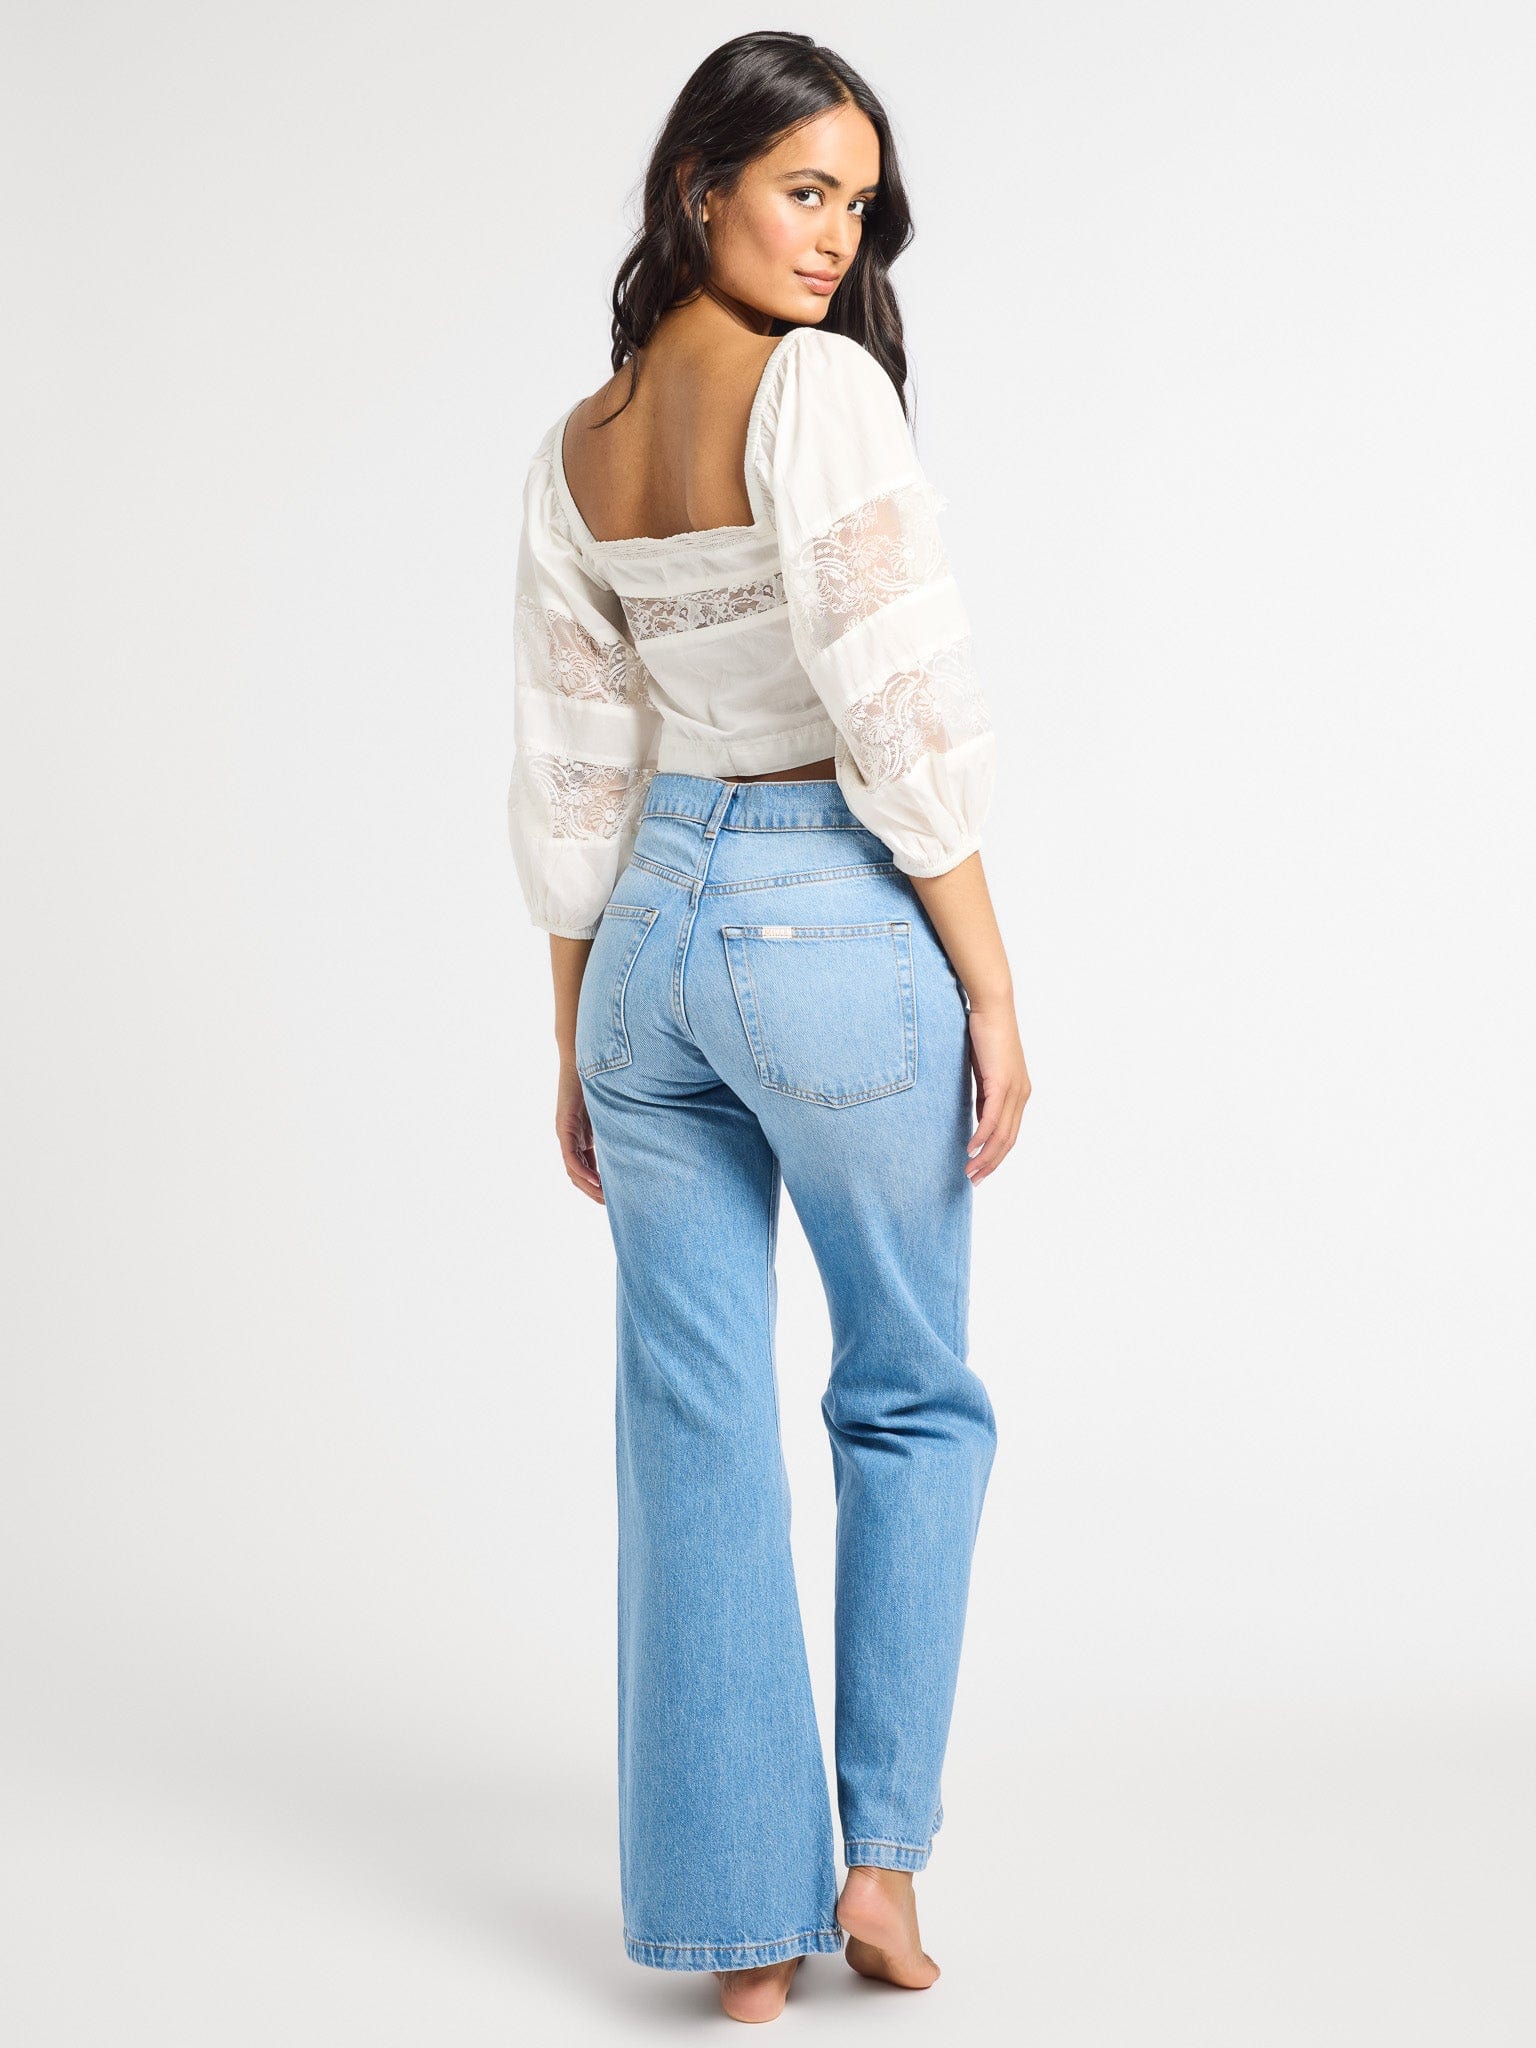 MILLE Clothing Corinne Top in Ivory